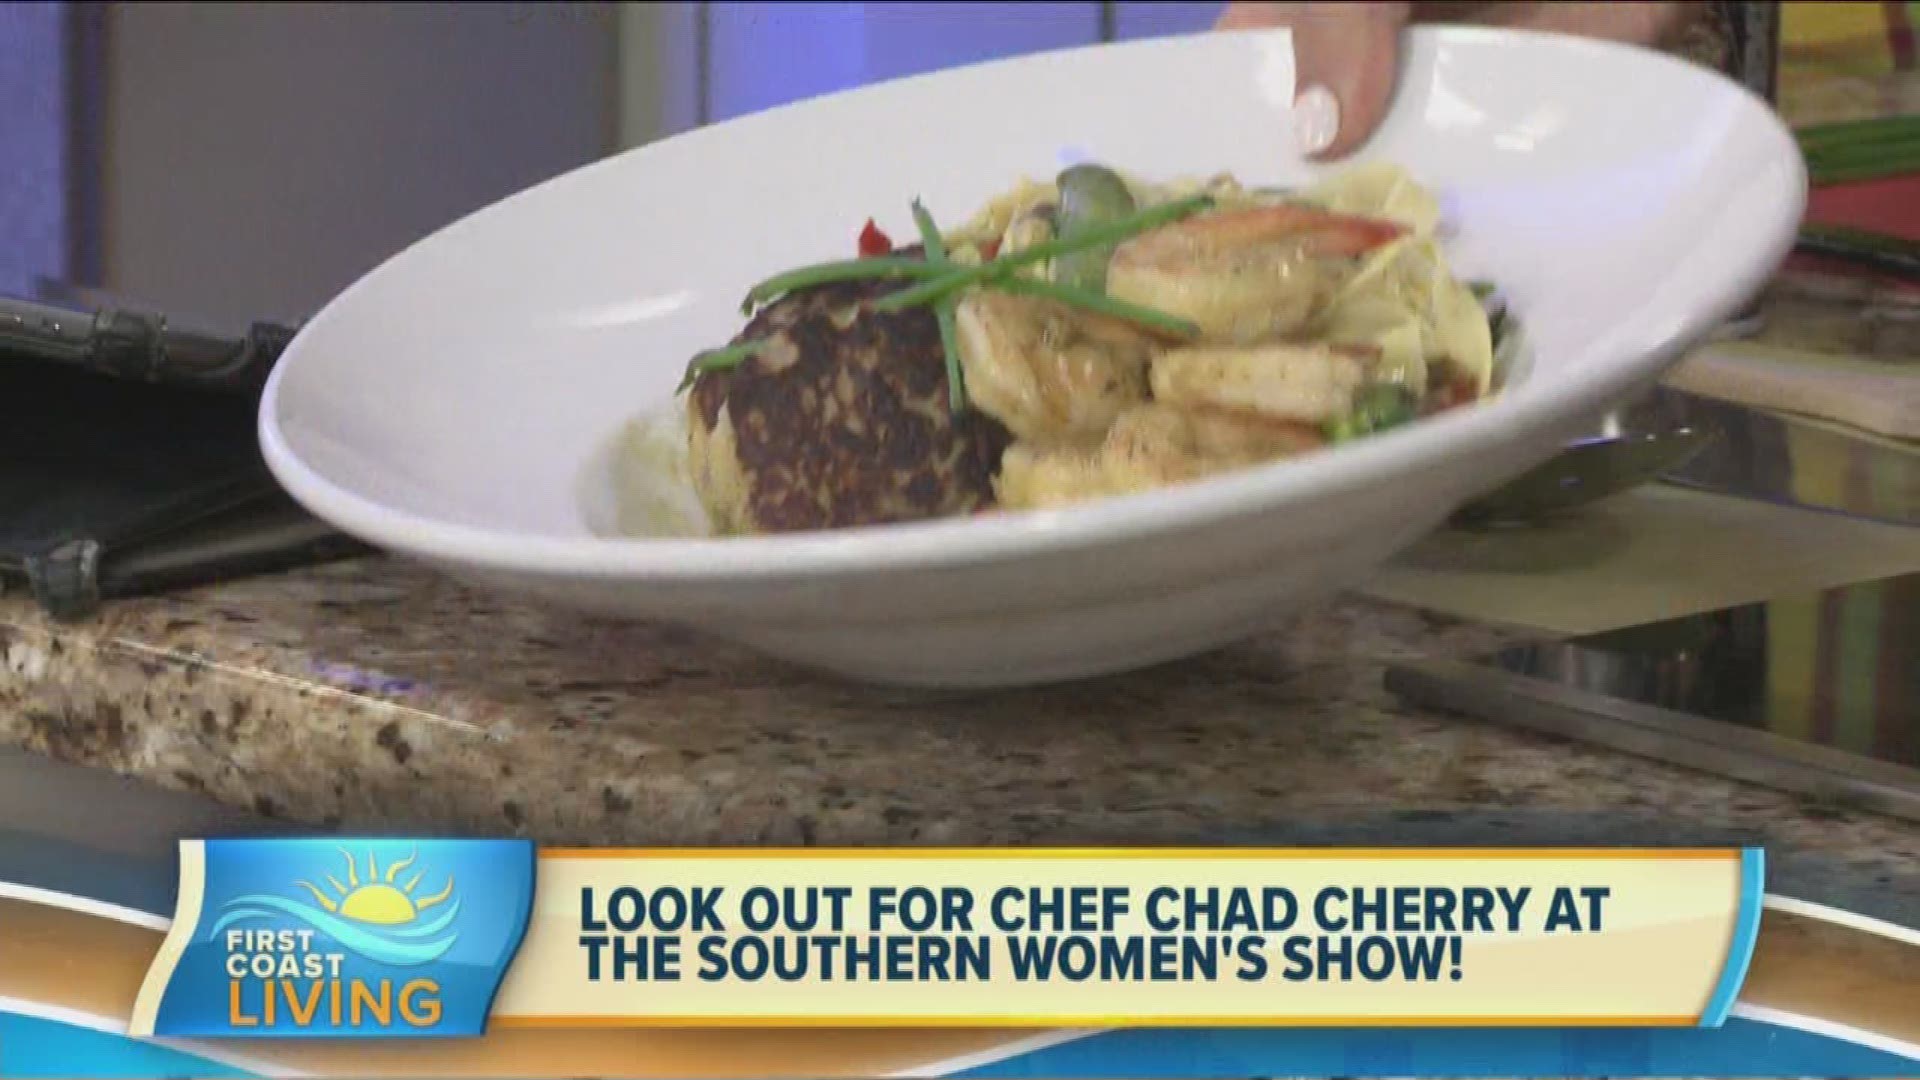 You don't want to miss Chef Chad on Saturday!